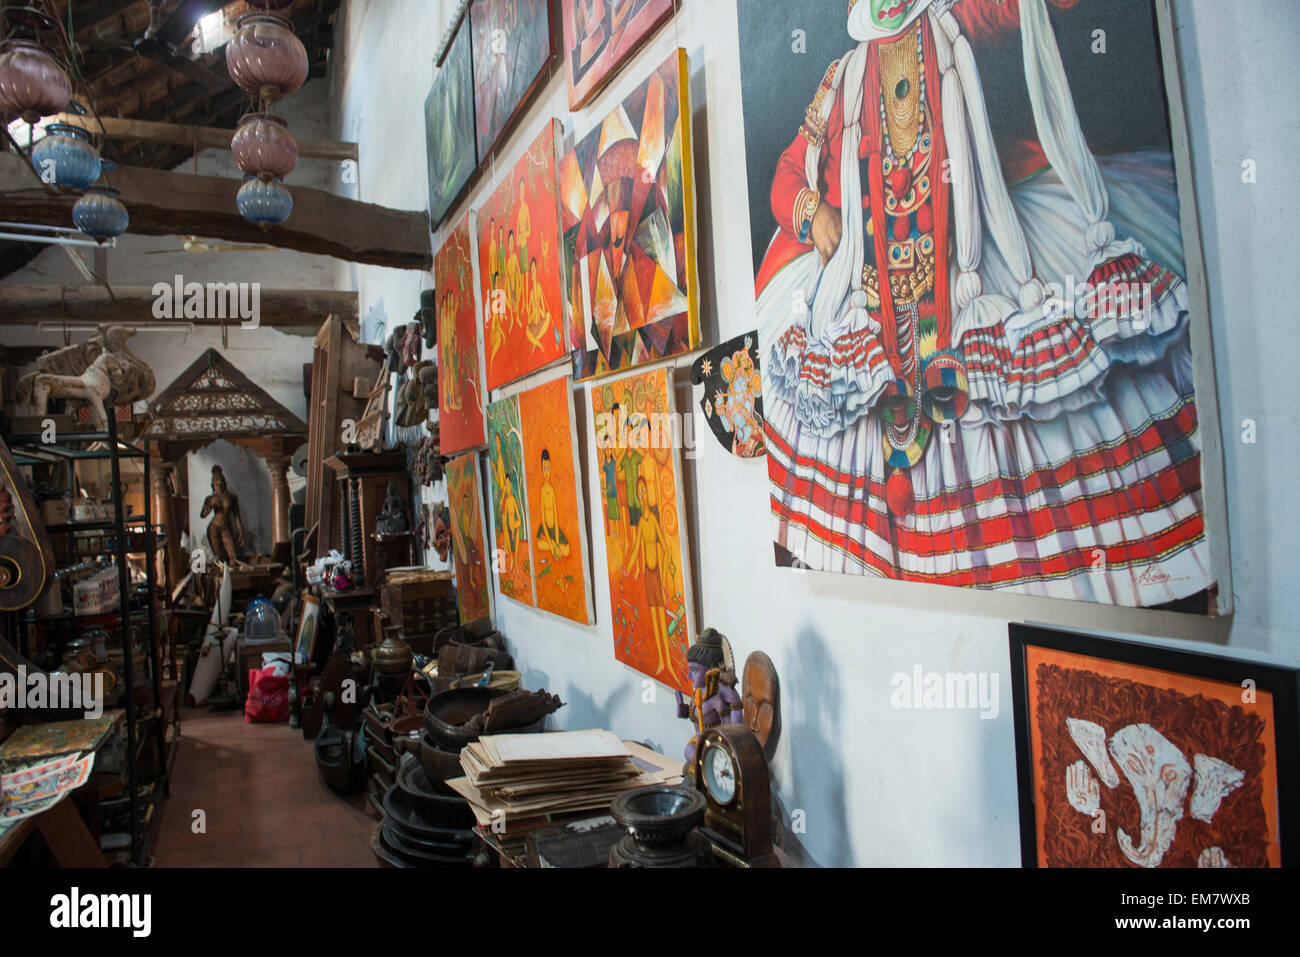 Antiques and artifacts in a Heritage Art Shop in Jew Town, Fort Kochi, Kerala India Stock Photo